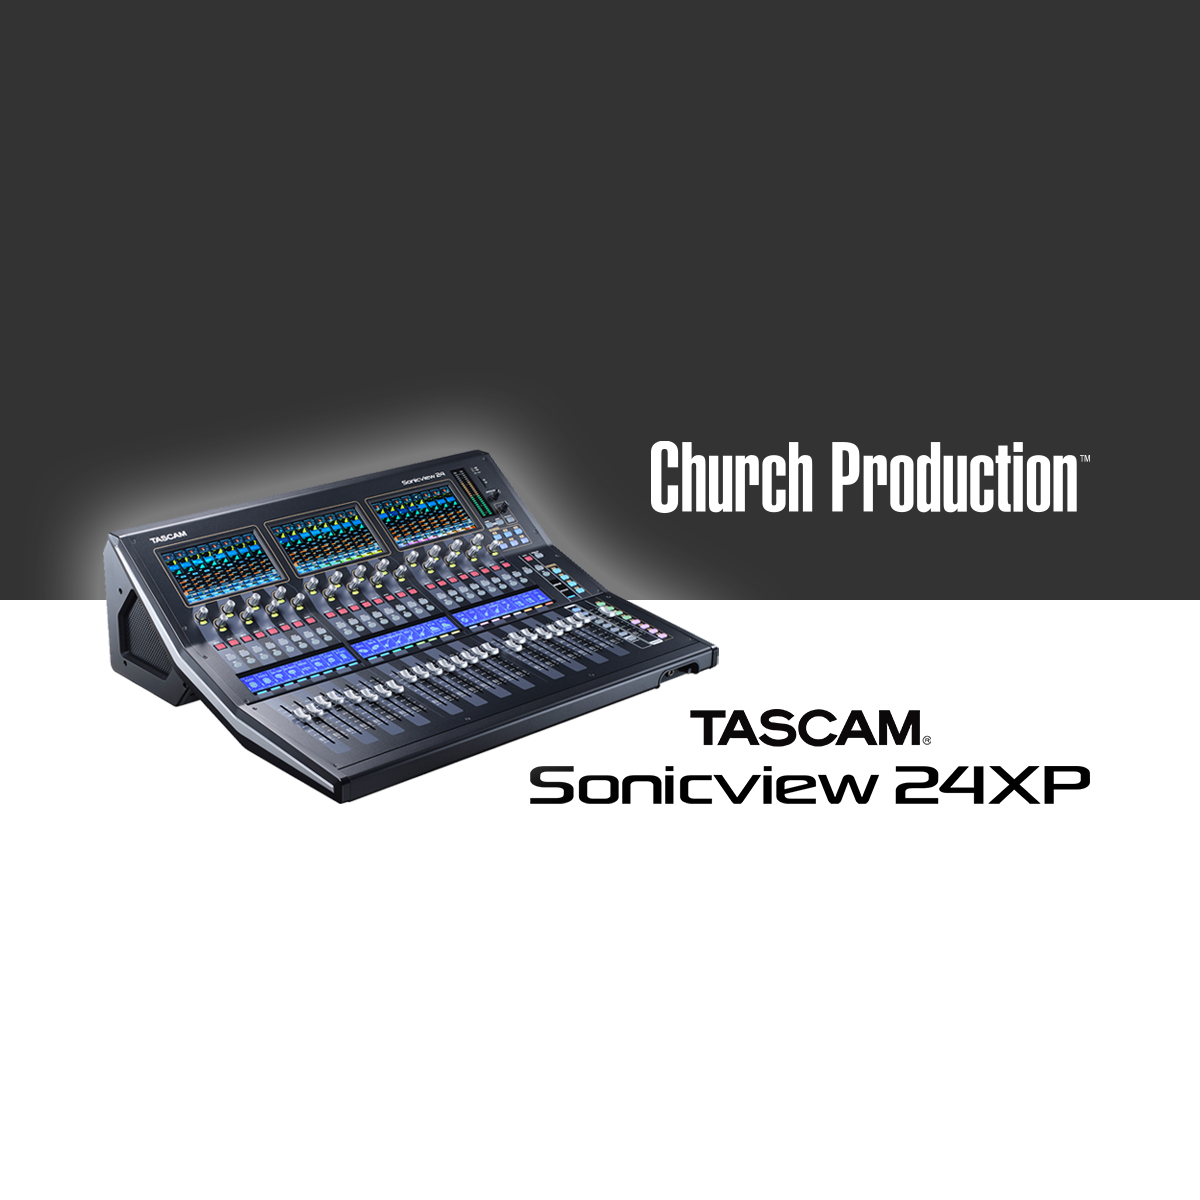 TASCAM Shakes Up the Audio Console Market with the Feature-packed Sonicview 24XP